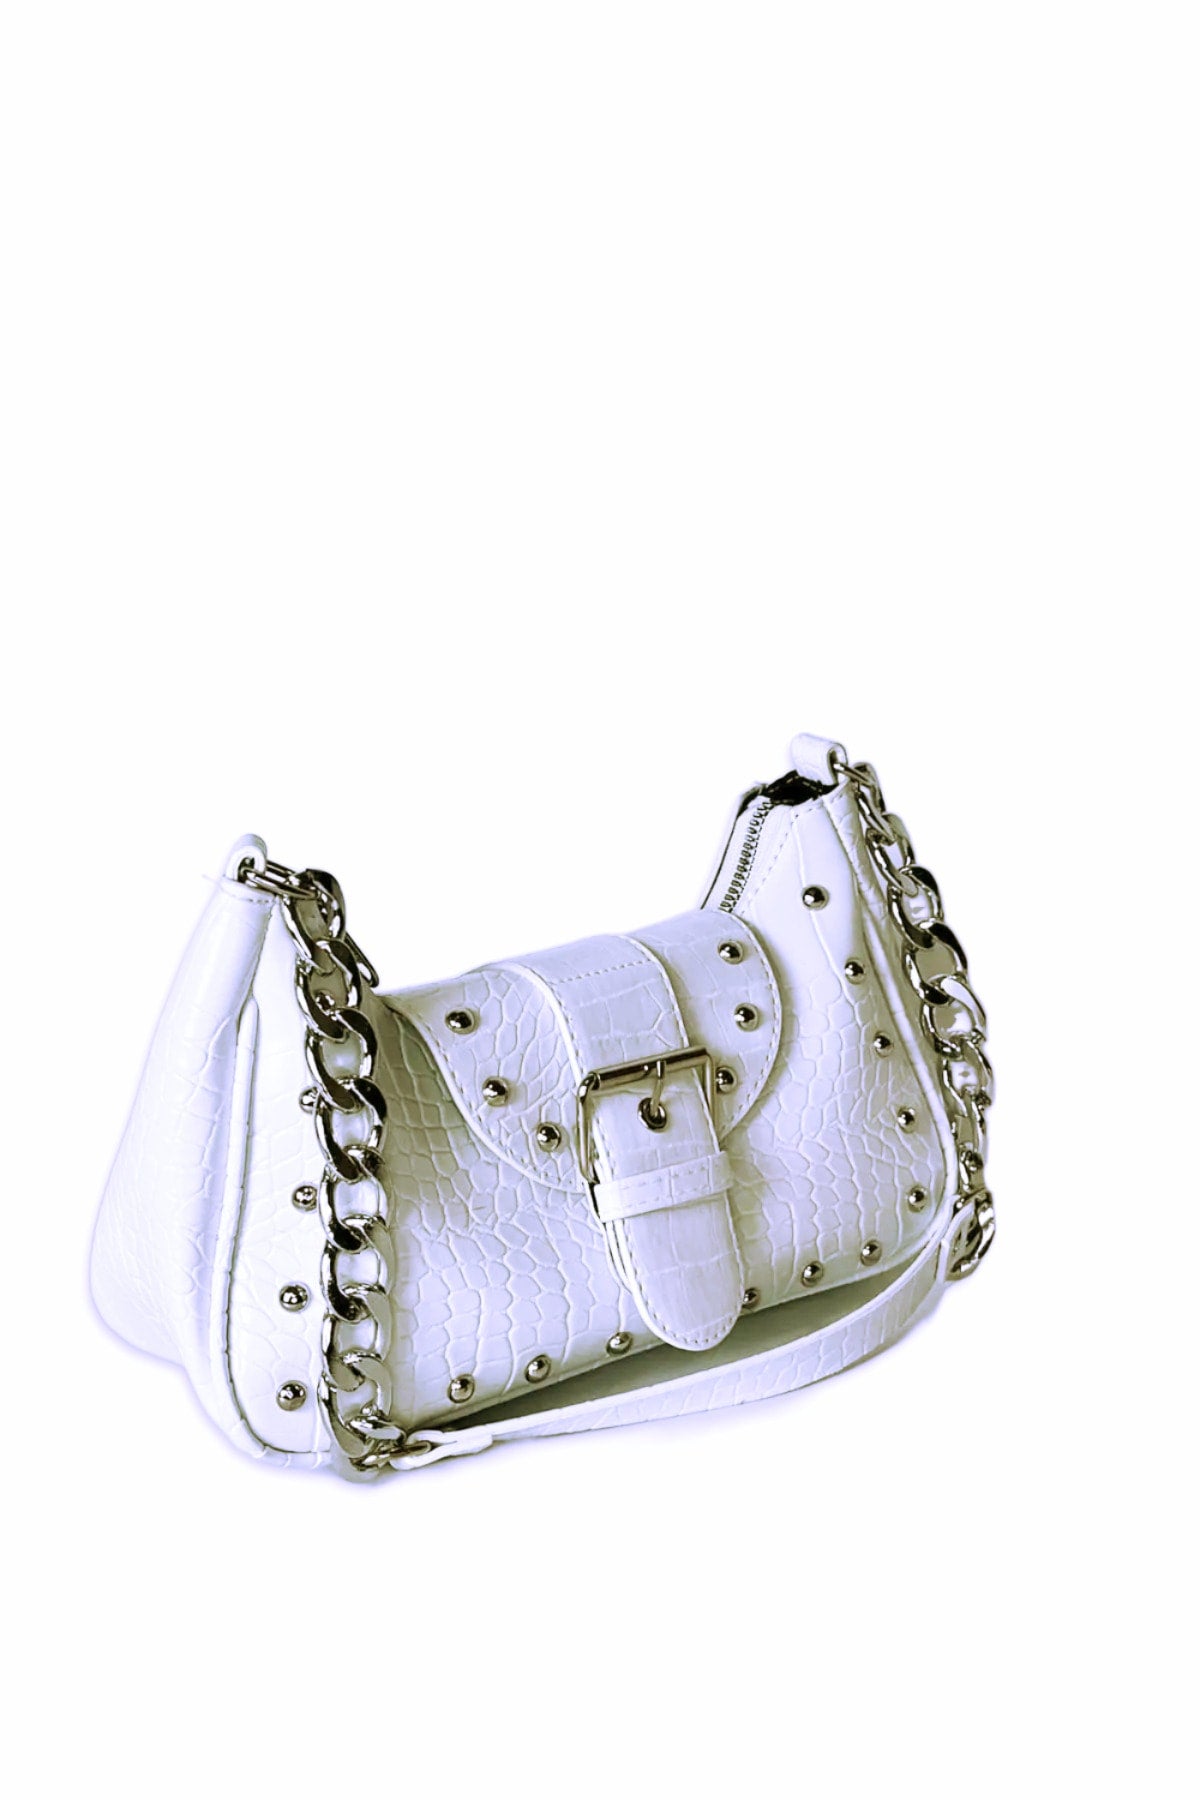 Crocodile Patterned White Handle Bag with Bony Staples